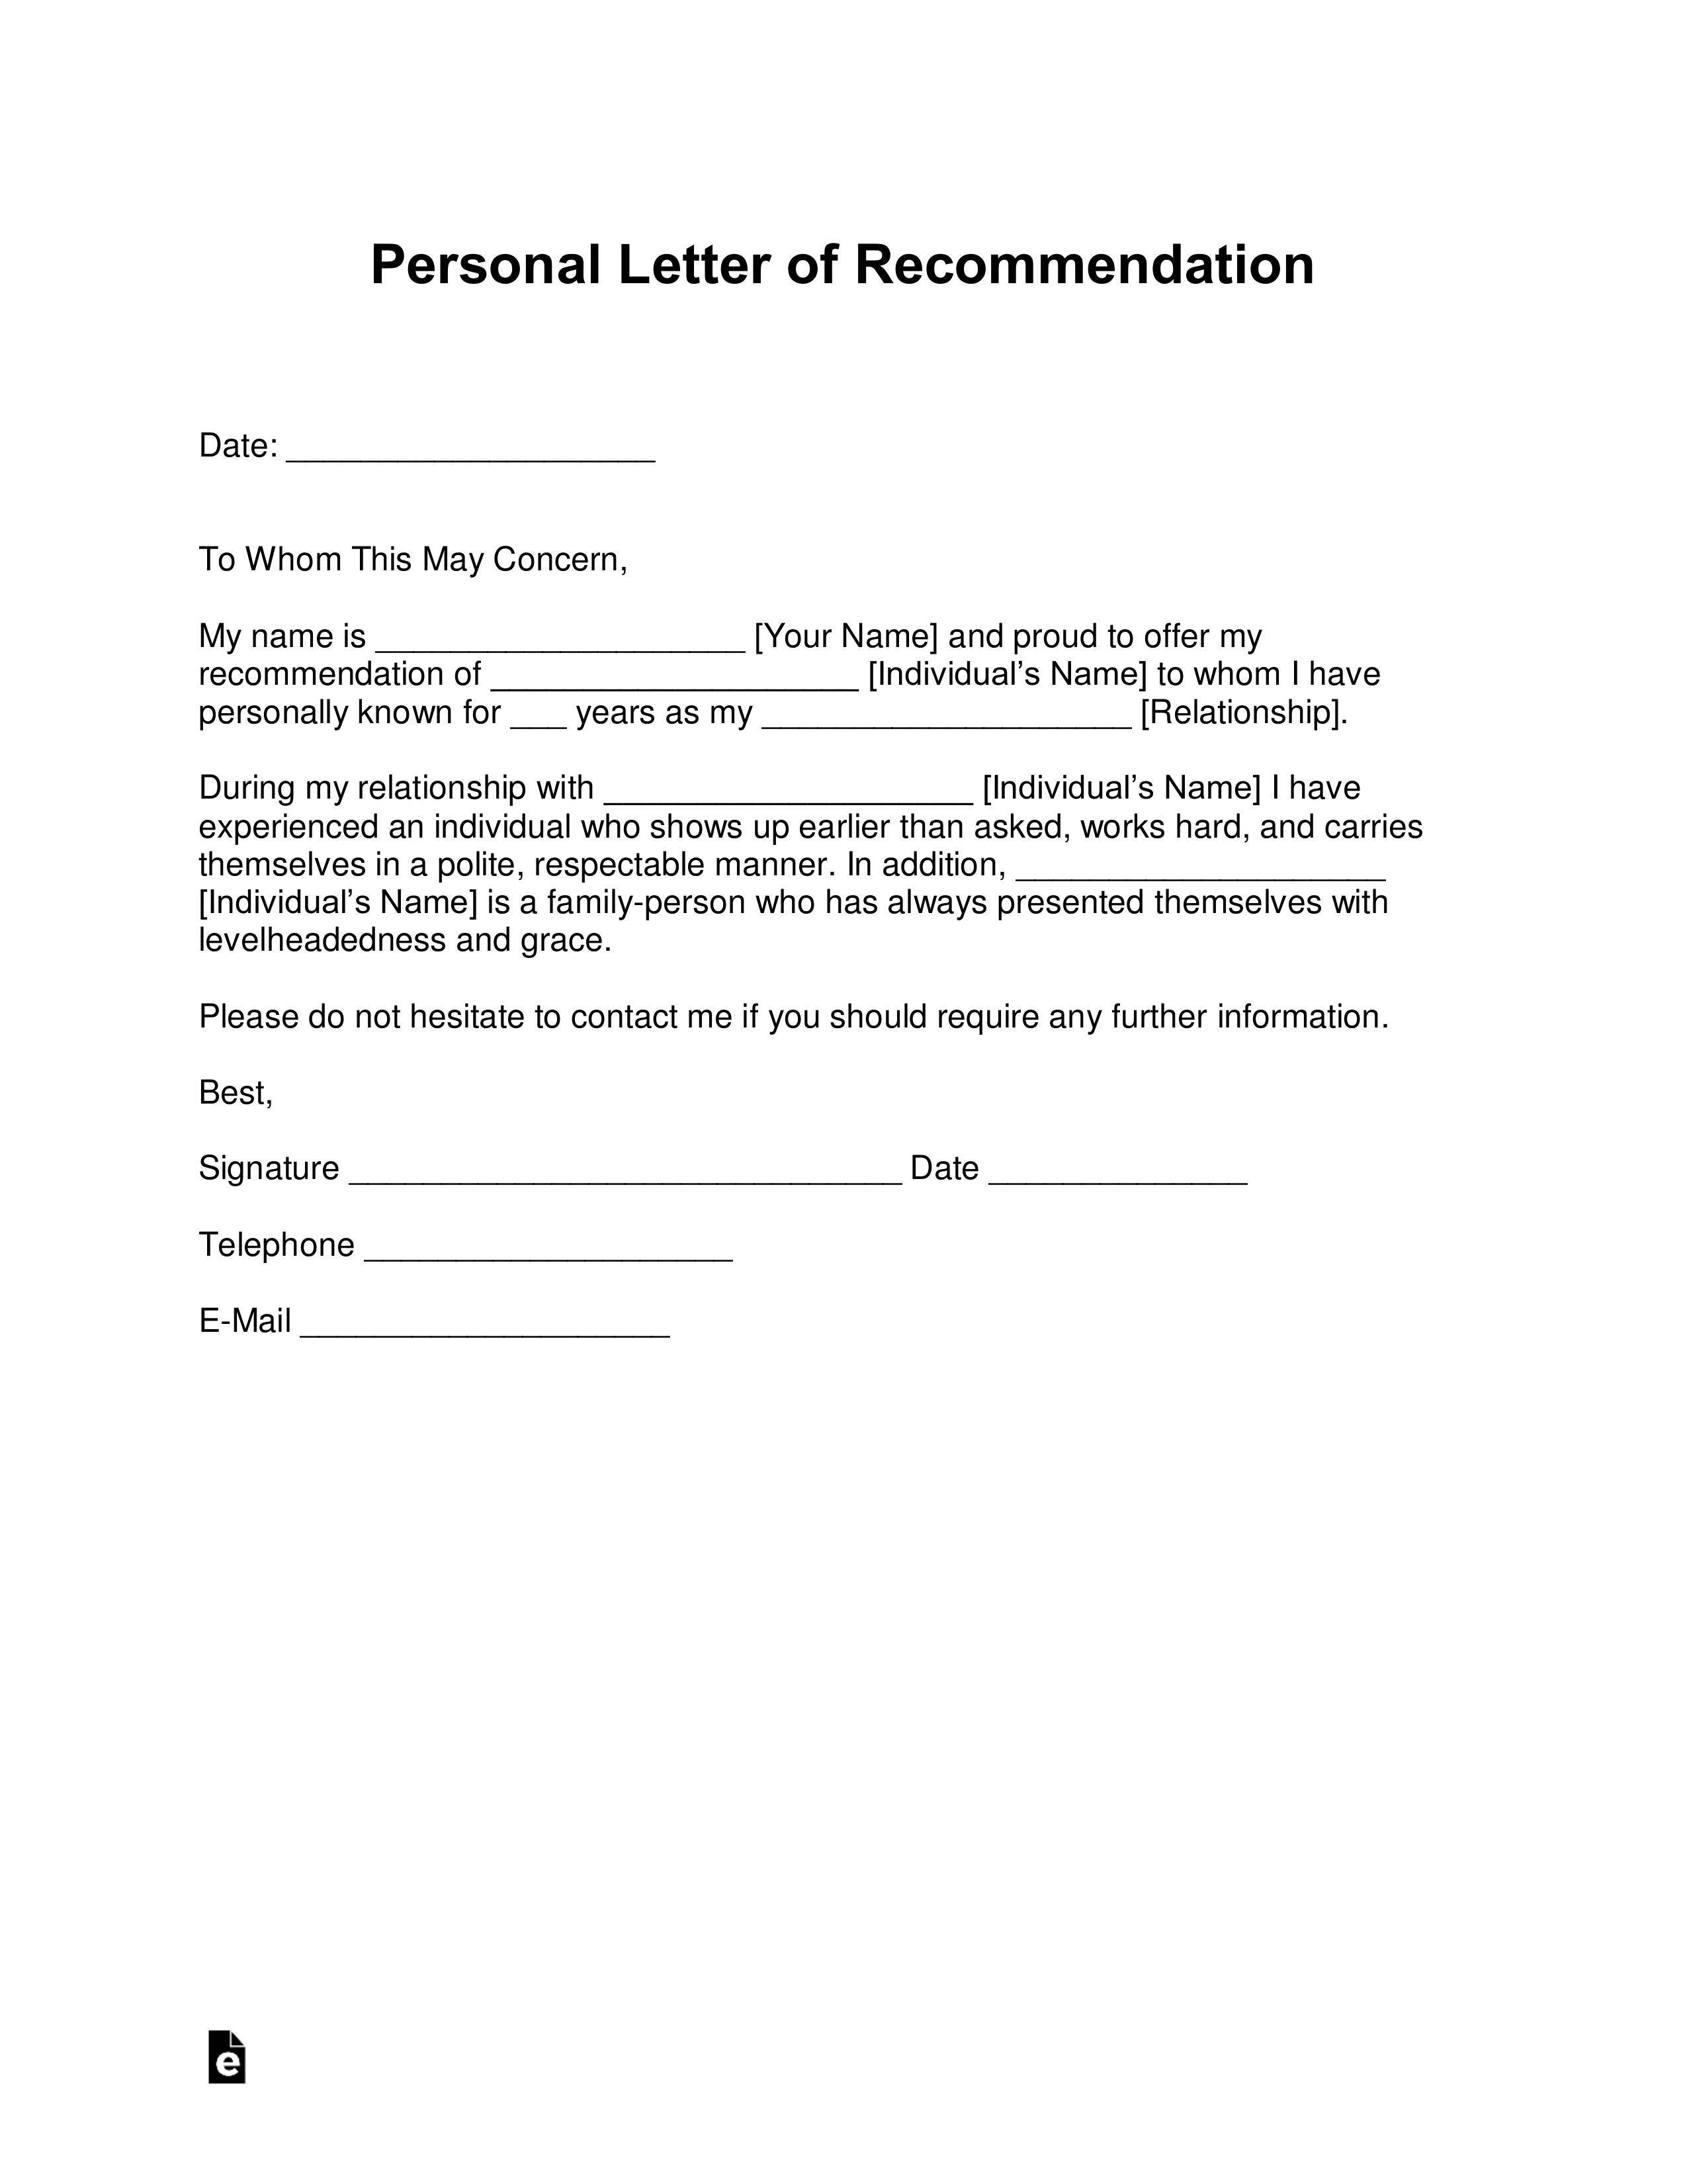 Personal Reference Letter Samples from eforms.com